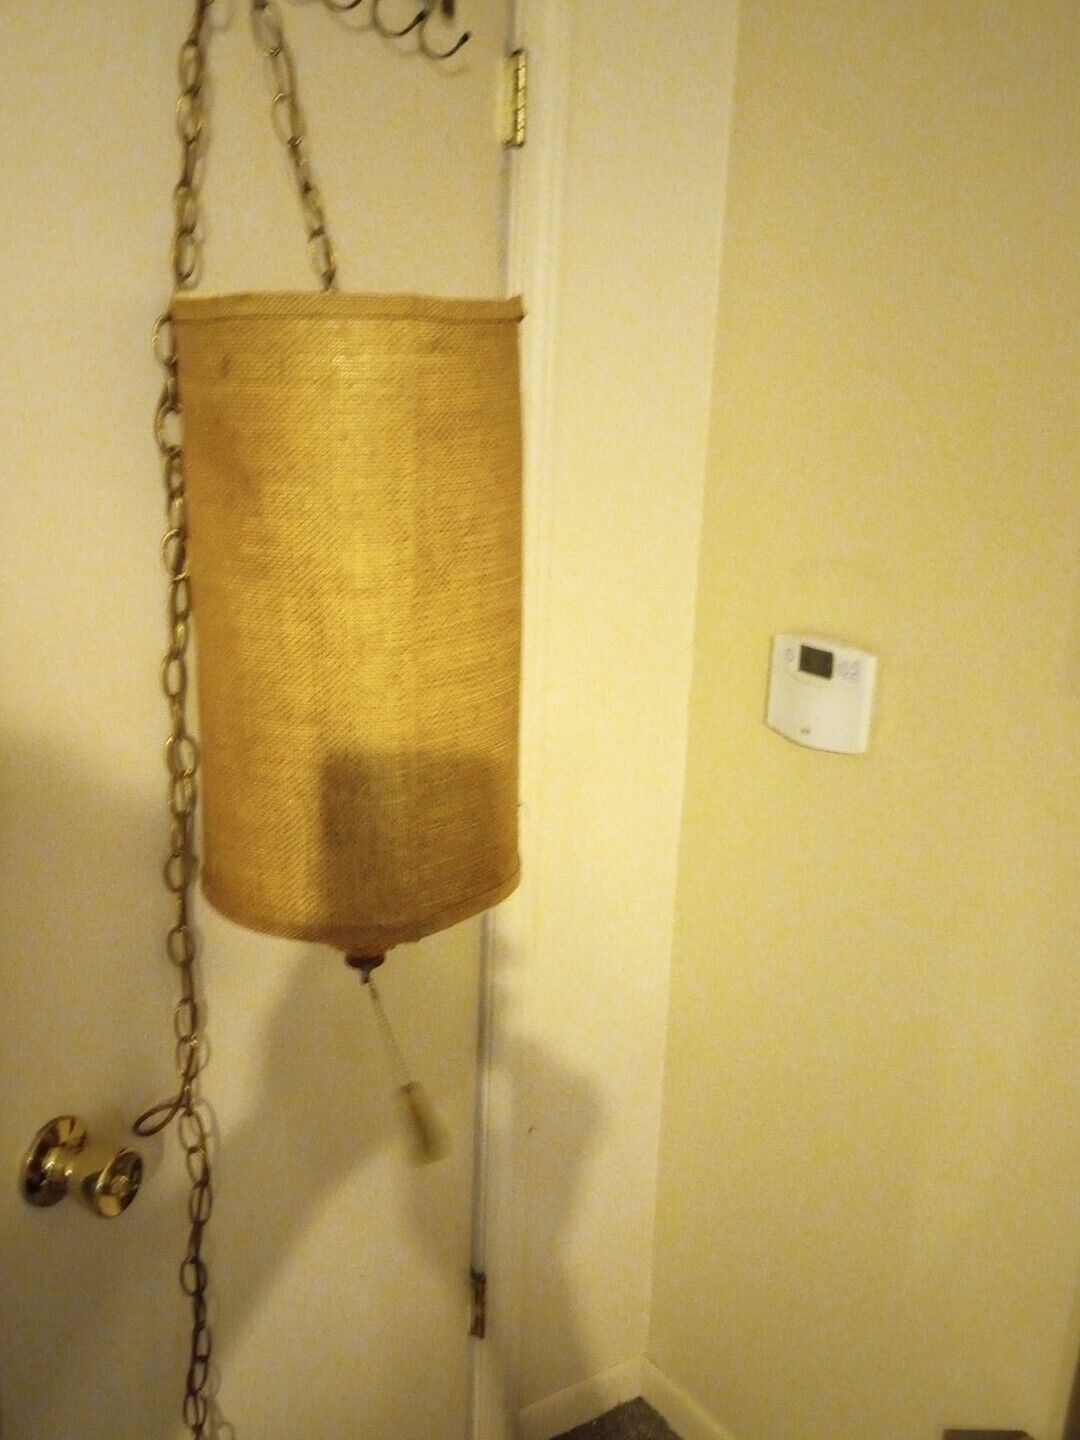 Chain Drum Lamp Hanging Shade Burlap Glass Swag Vintage Light MCM Electric